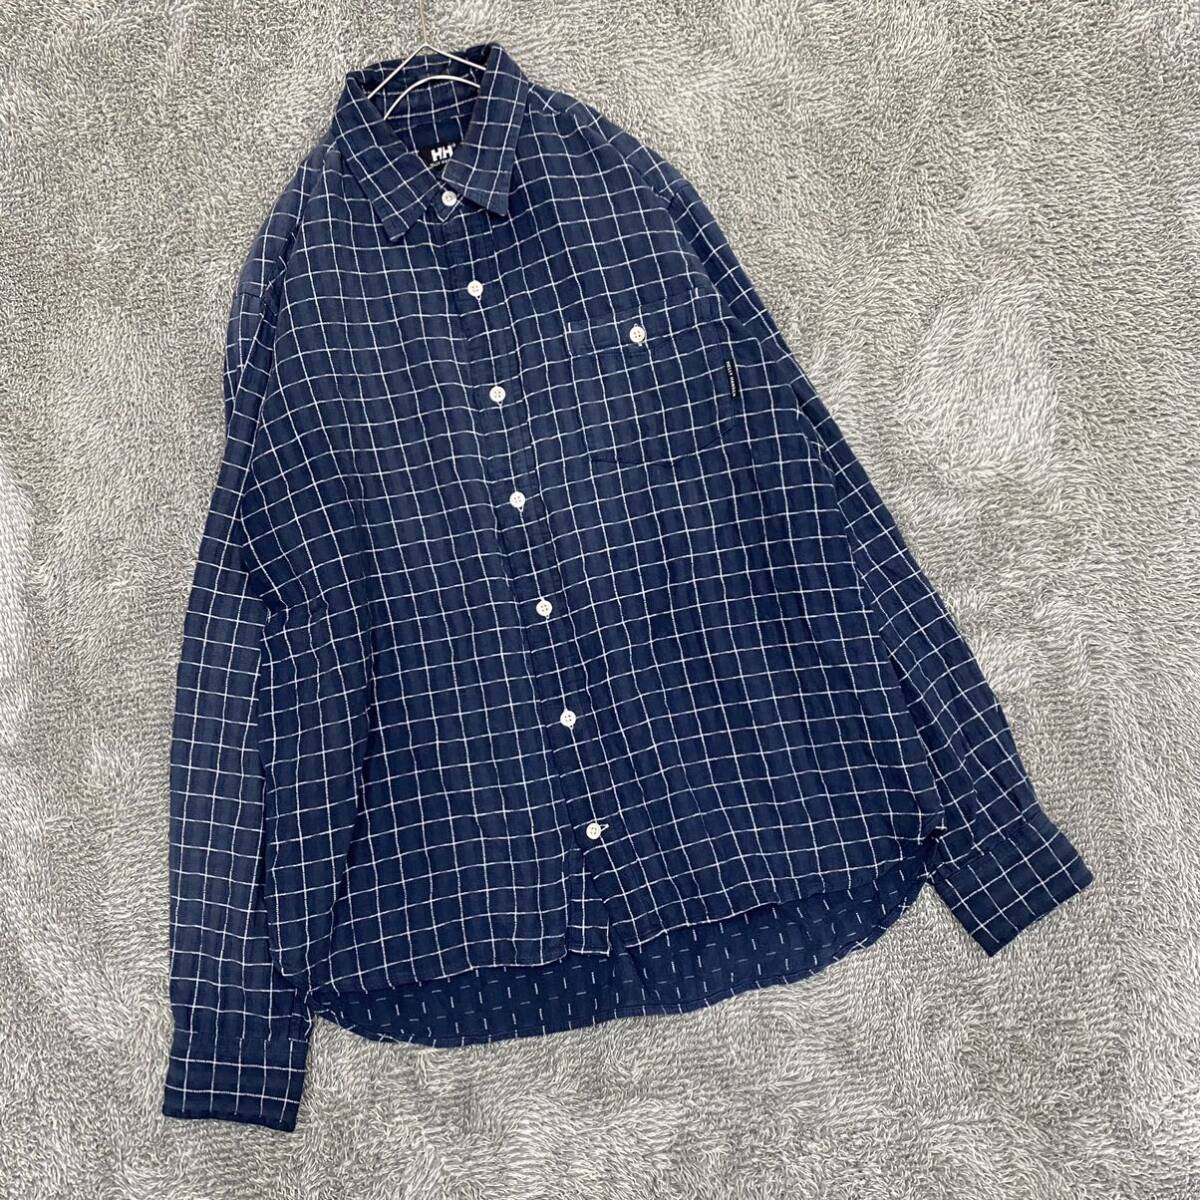 HELLY HANSEN Helly Hansen long sleeve shirt check shirt size S navy navy blue color men's tops there is no highest bid (I17)